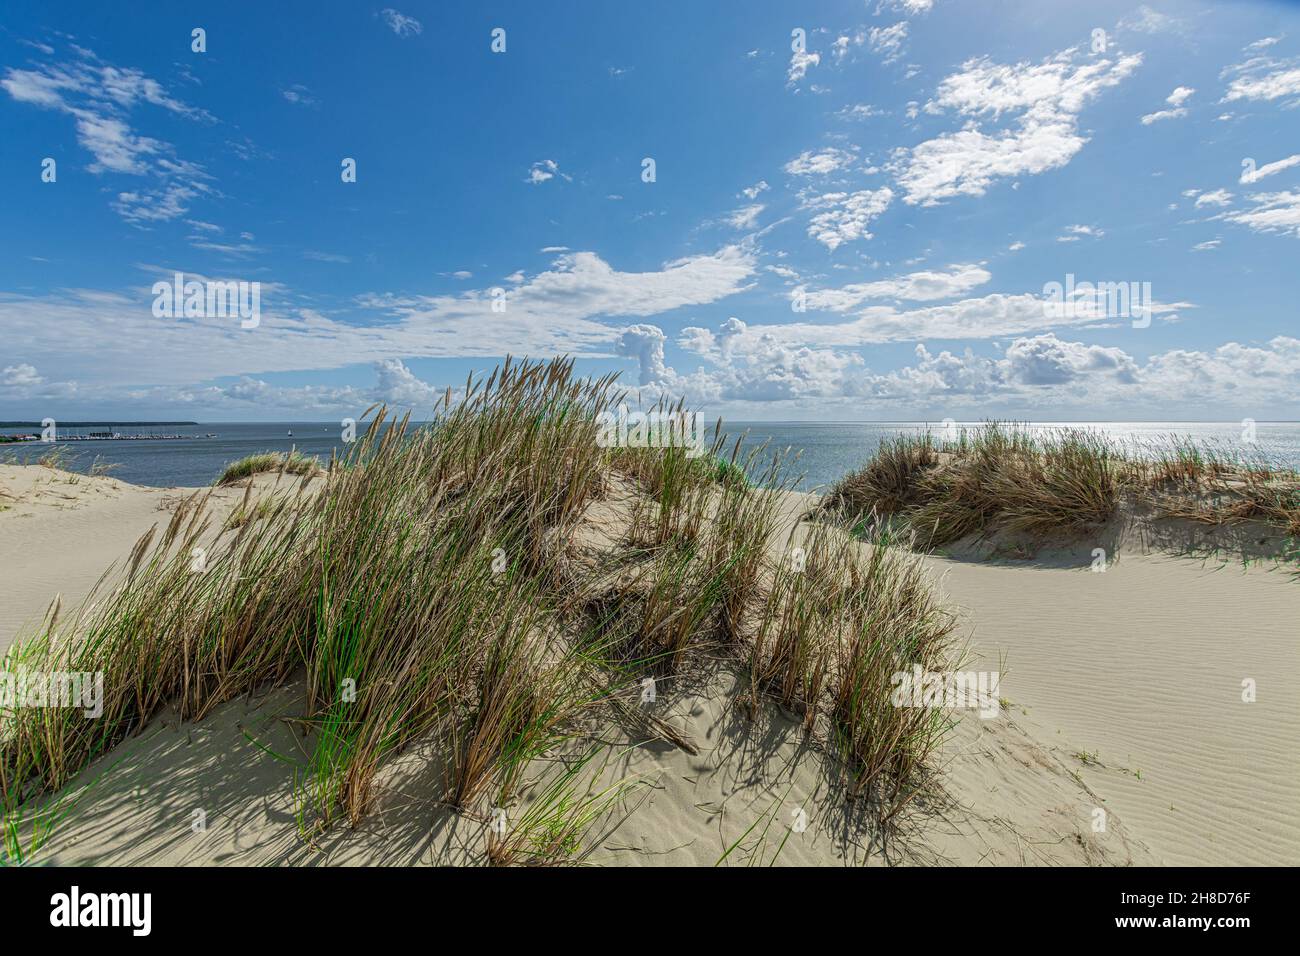 Panorama of dunes, Nida - Curonian Spit and Curonian Lagoon, Baltic dunes. UNESCO Heritage. Nida is located on the Curonian Spit. Stock Photo